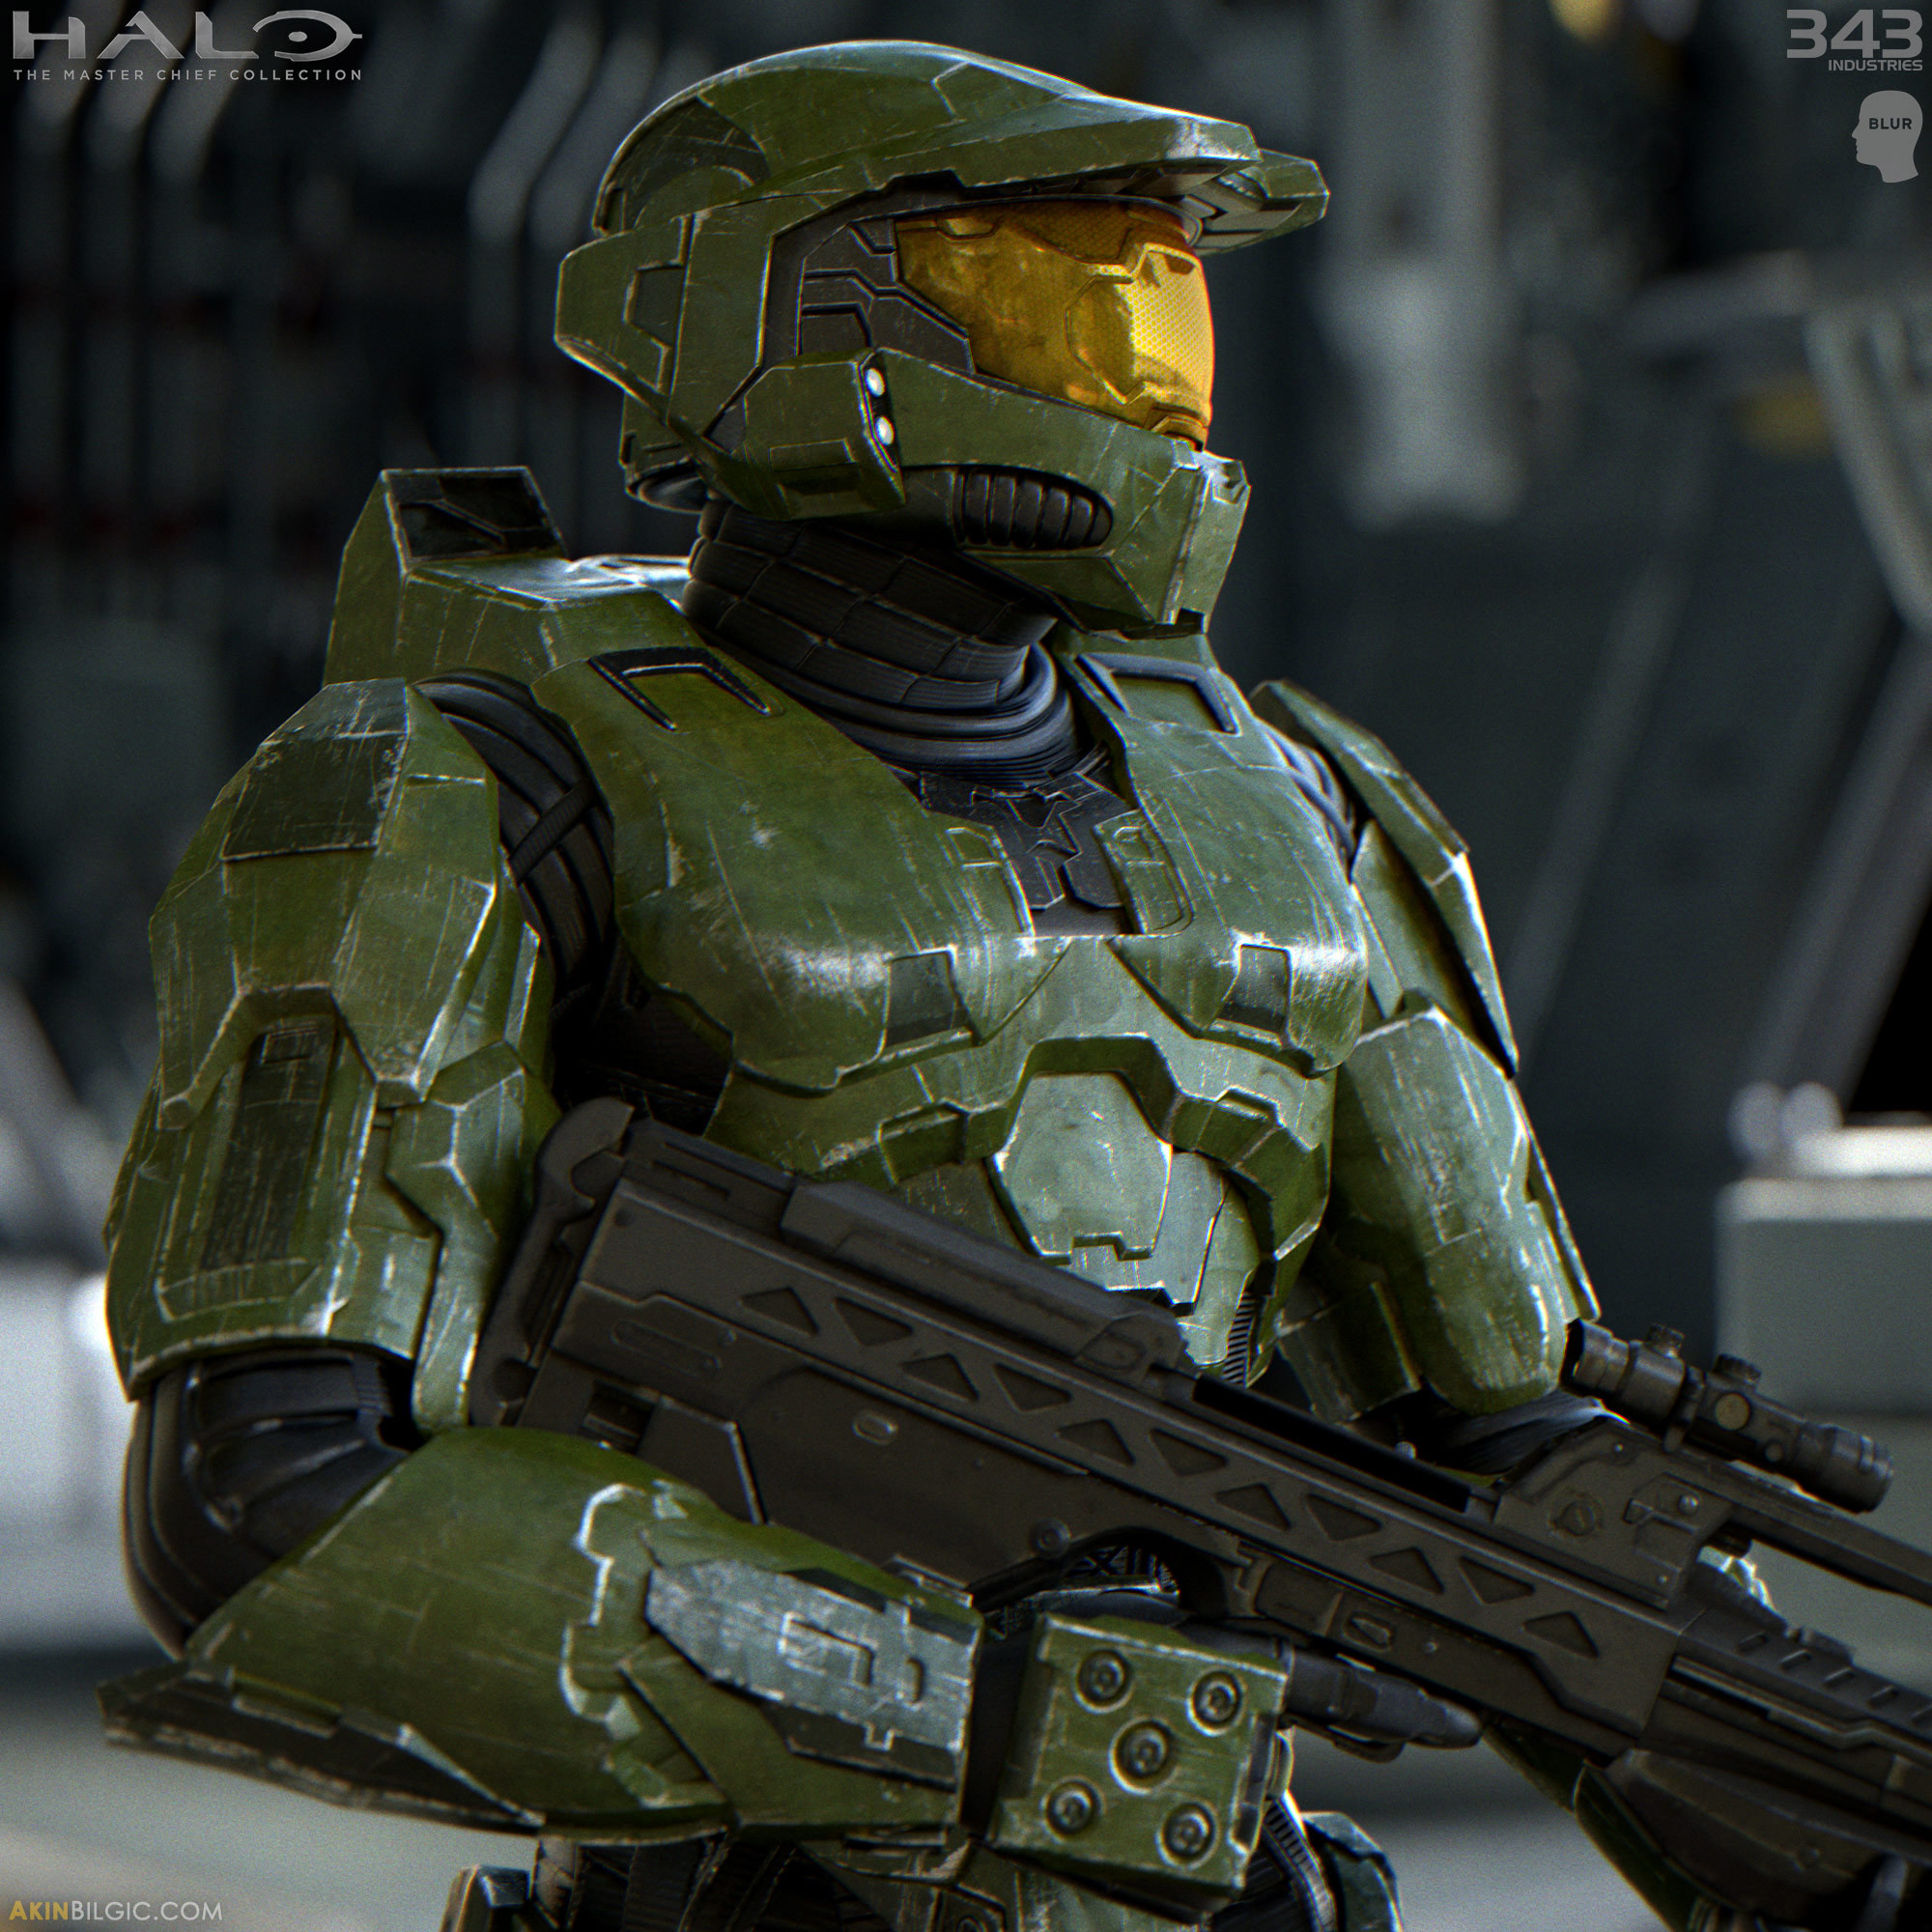 Heres the Official Halo 2 wallpapers for those who were interested in them  Wort Wort Worthog anyone  rhalo